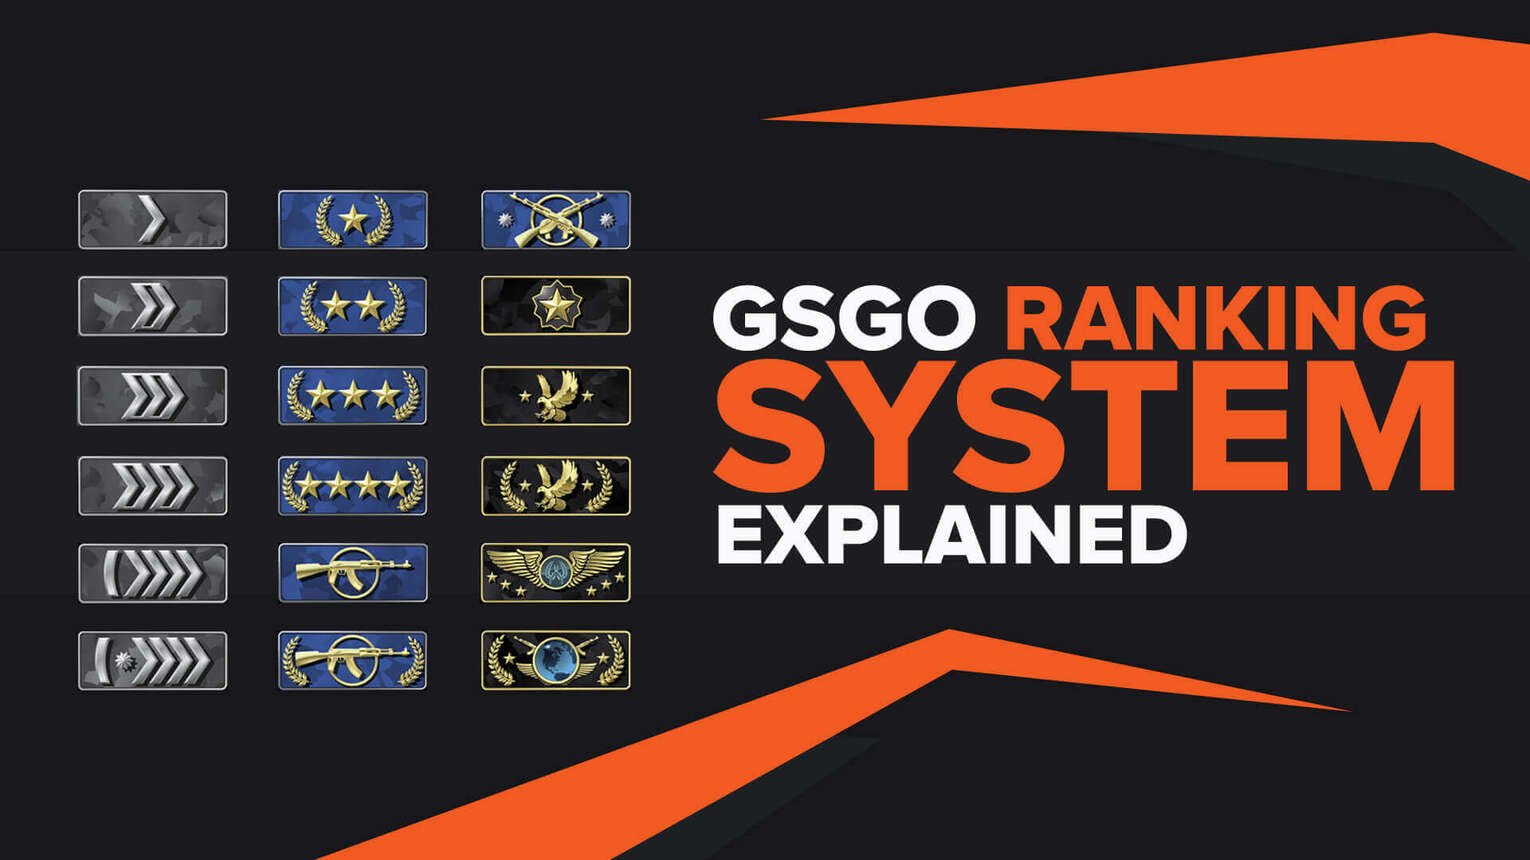 Call of Duty Mobile ranks and ranking system explained